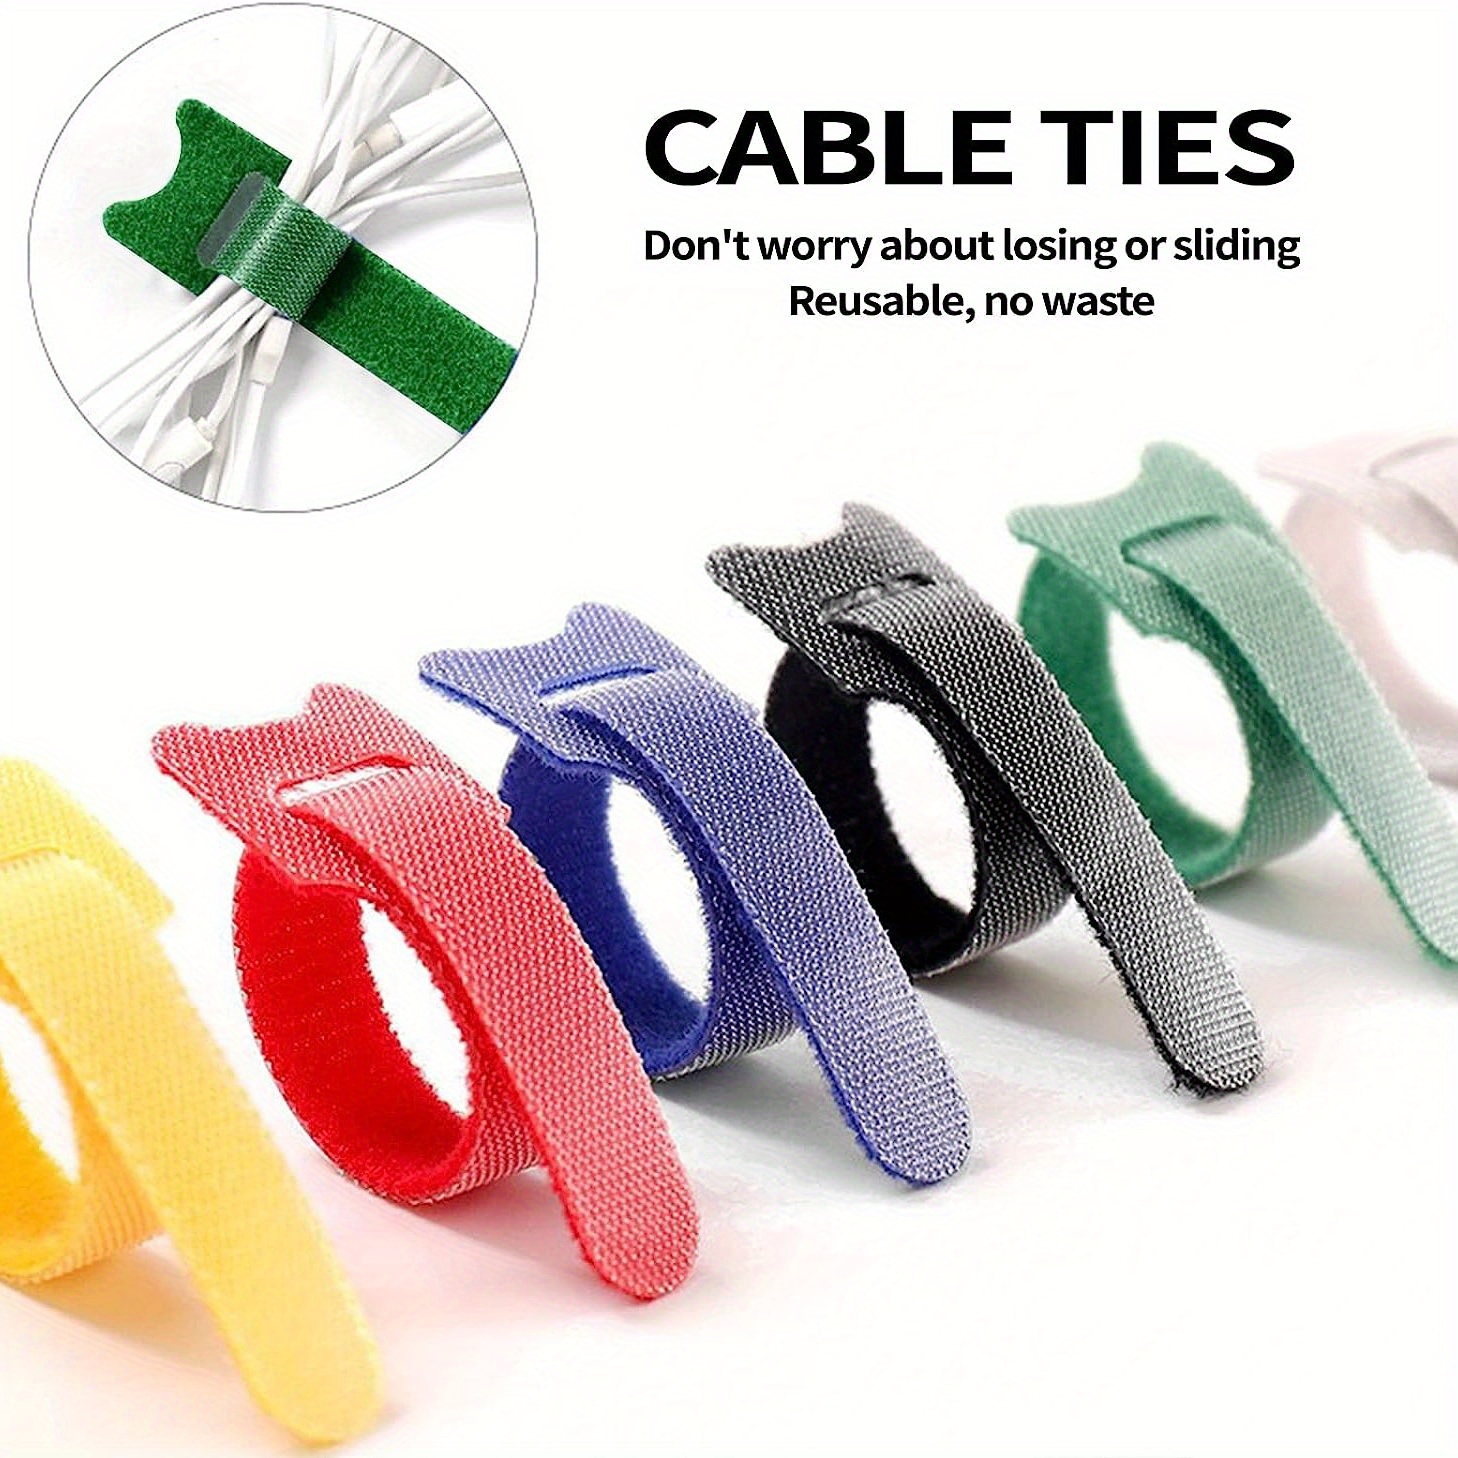 60PCS 6 Inches Reusable Cable Ties, Newlan Adjustable Cord Straps